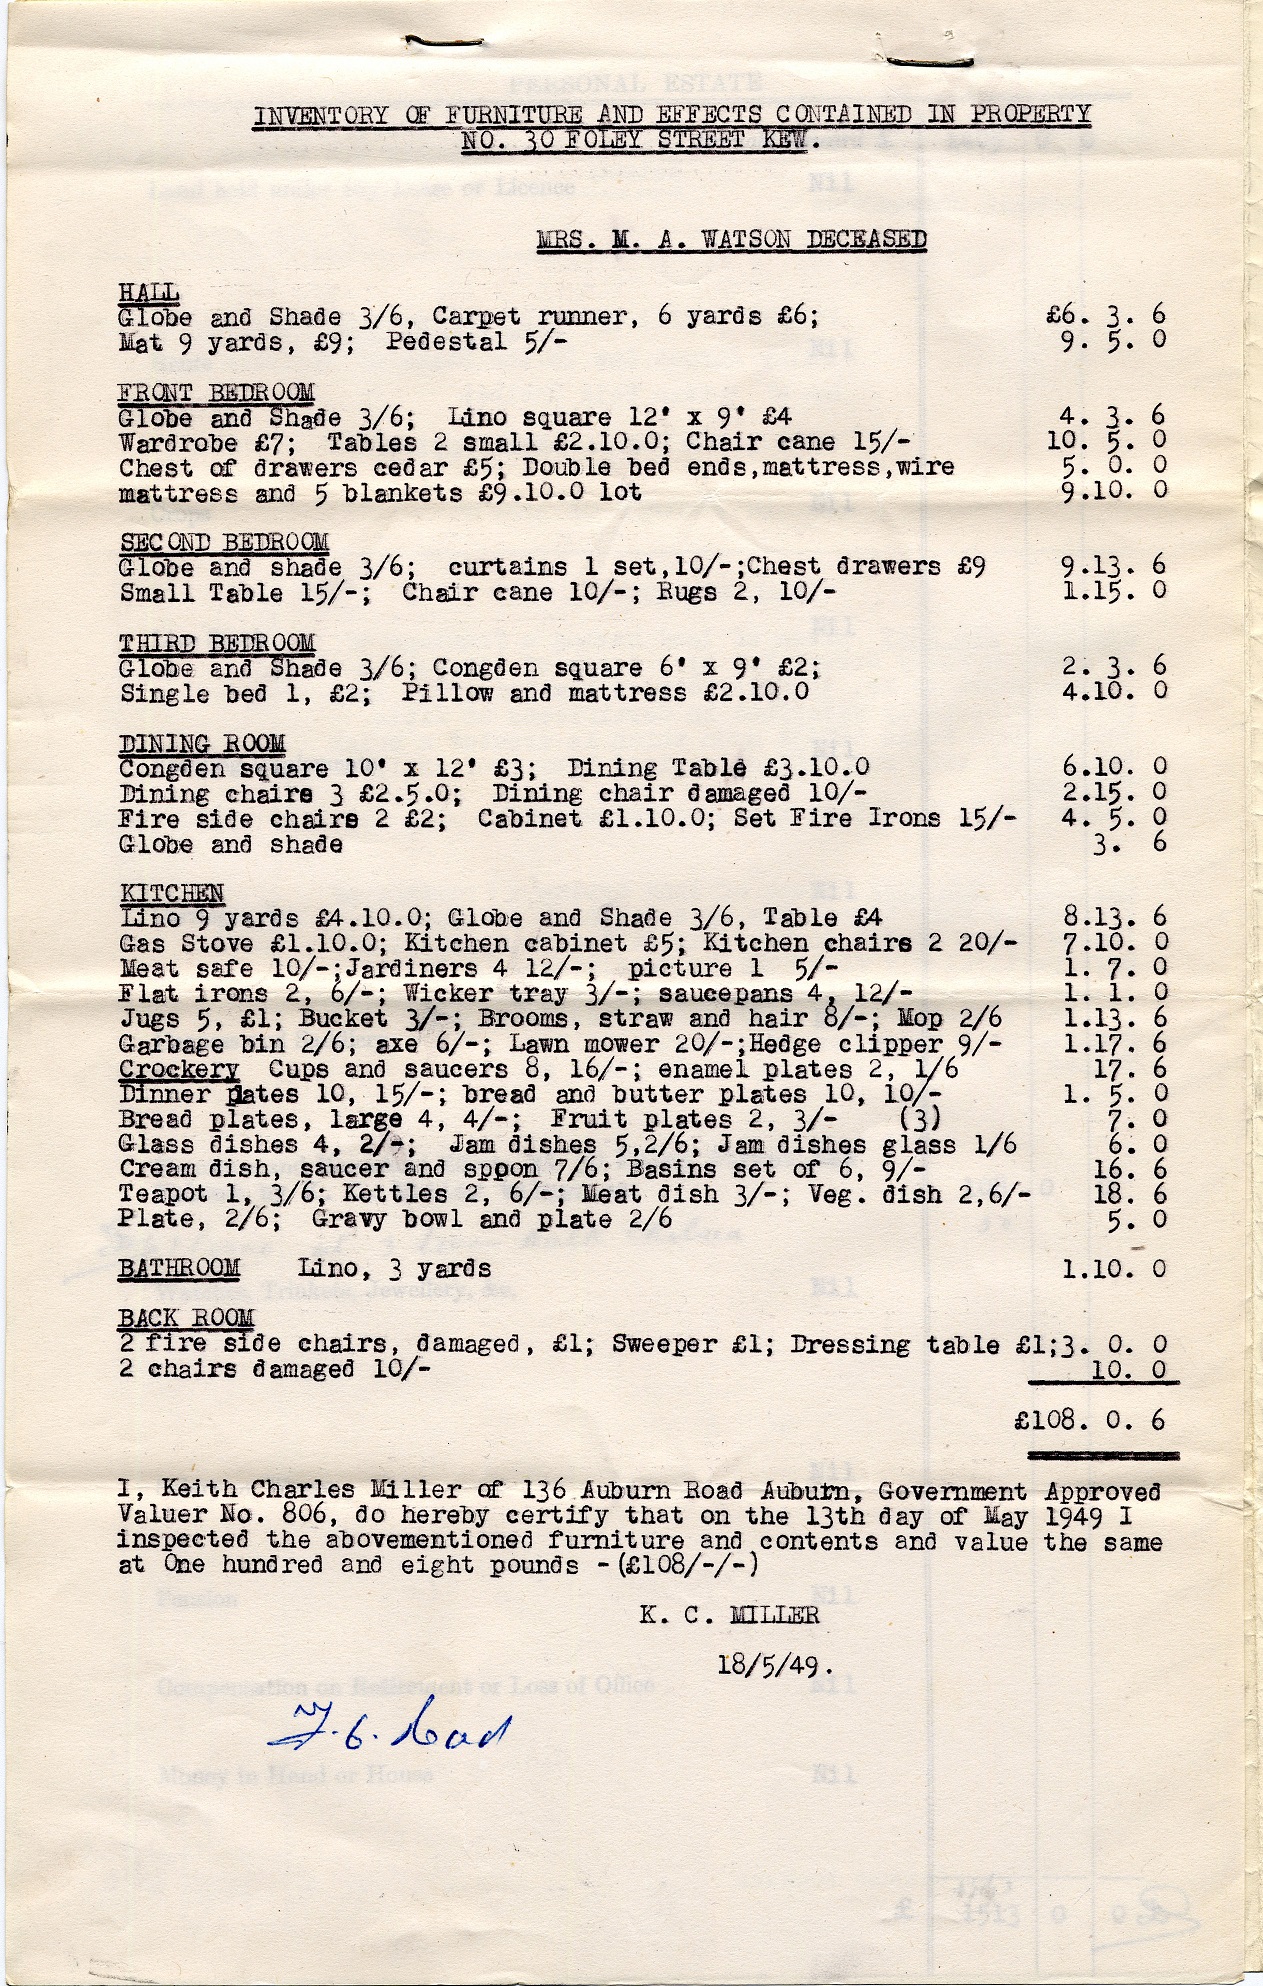 nventory of household contents in a 1949 probate record